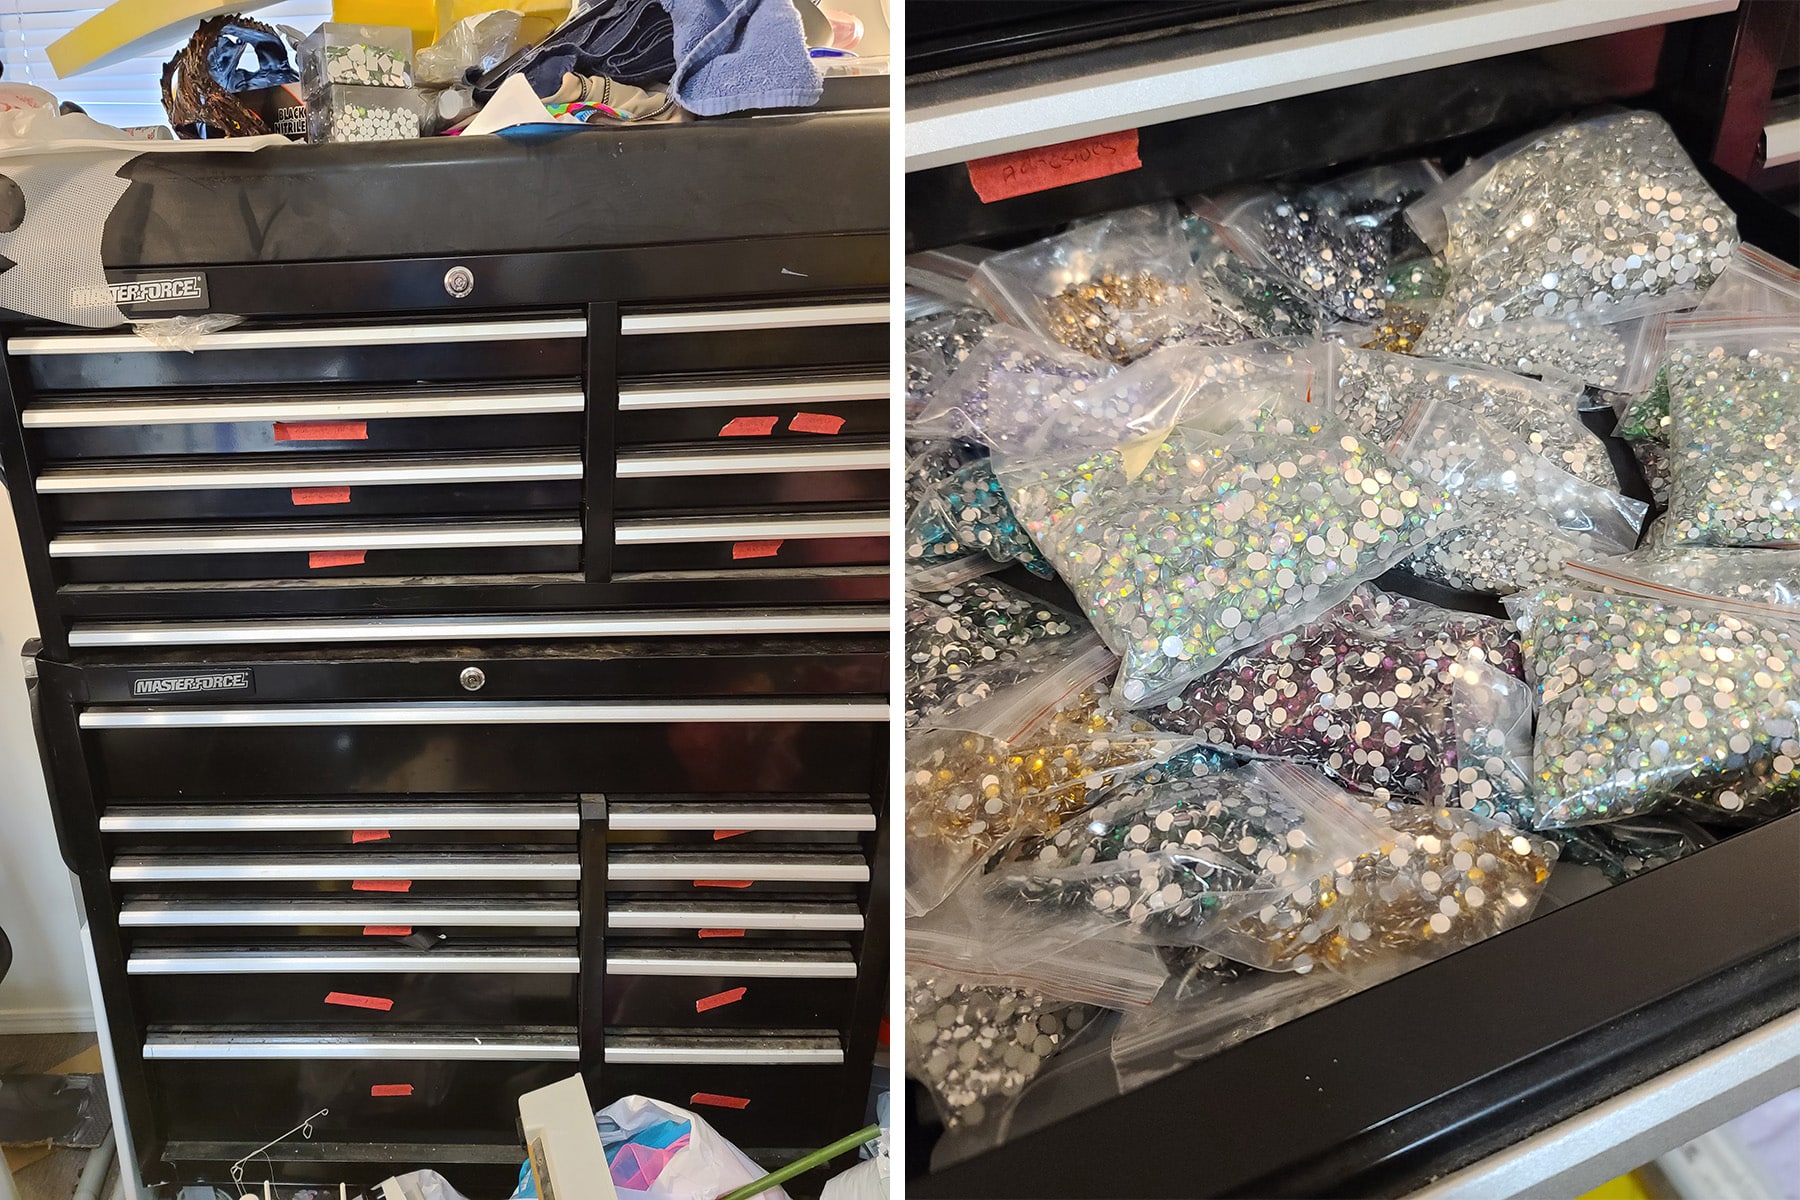 A two part compilation image showing the outside of a large tool chest, and the inside of one of the drawers, filled with bags of rhinestones.